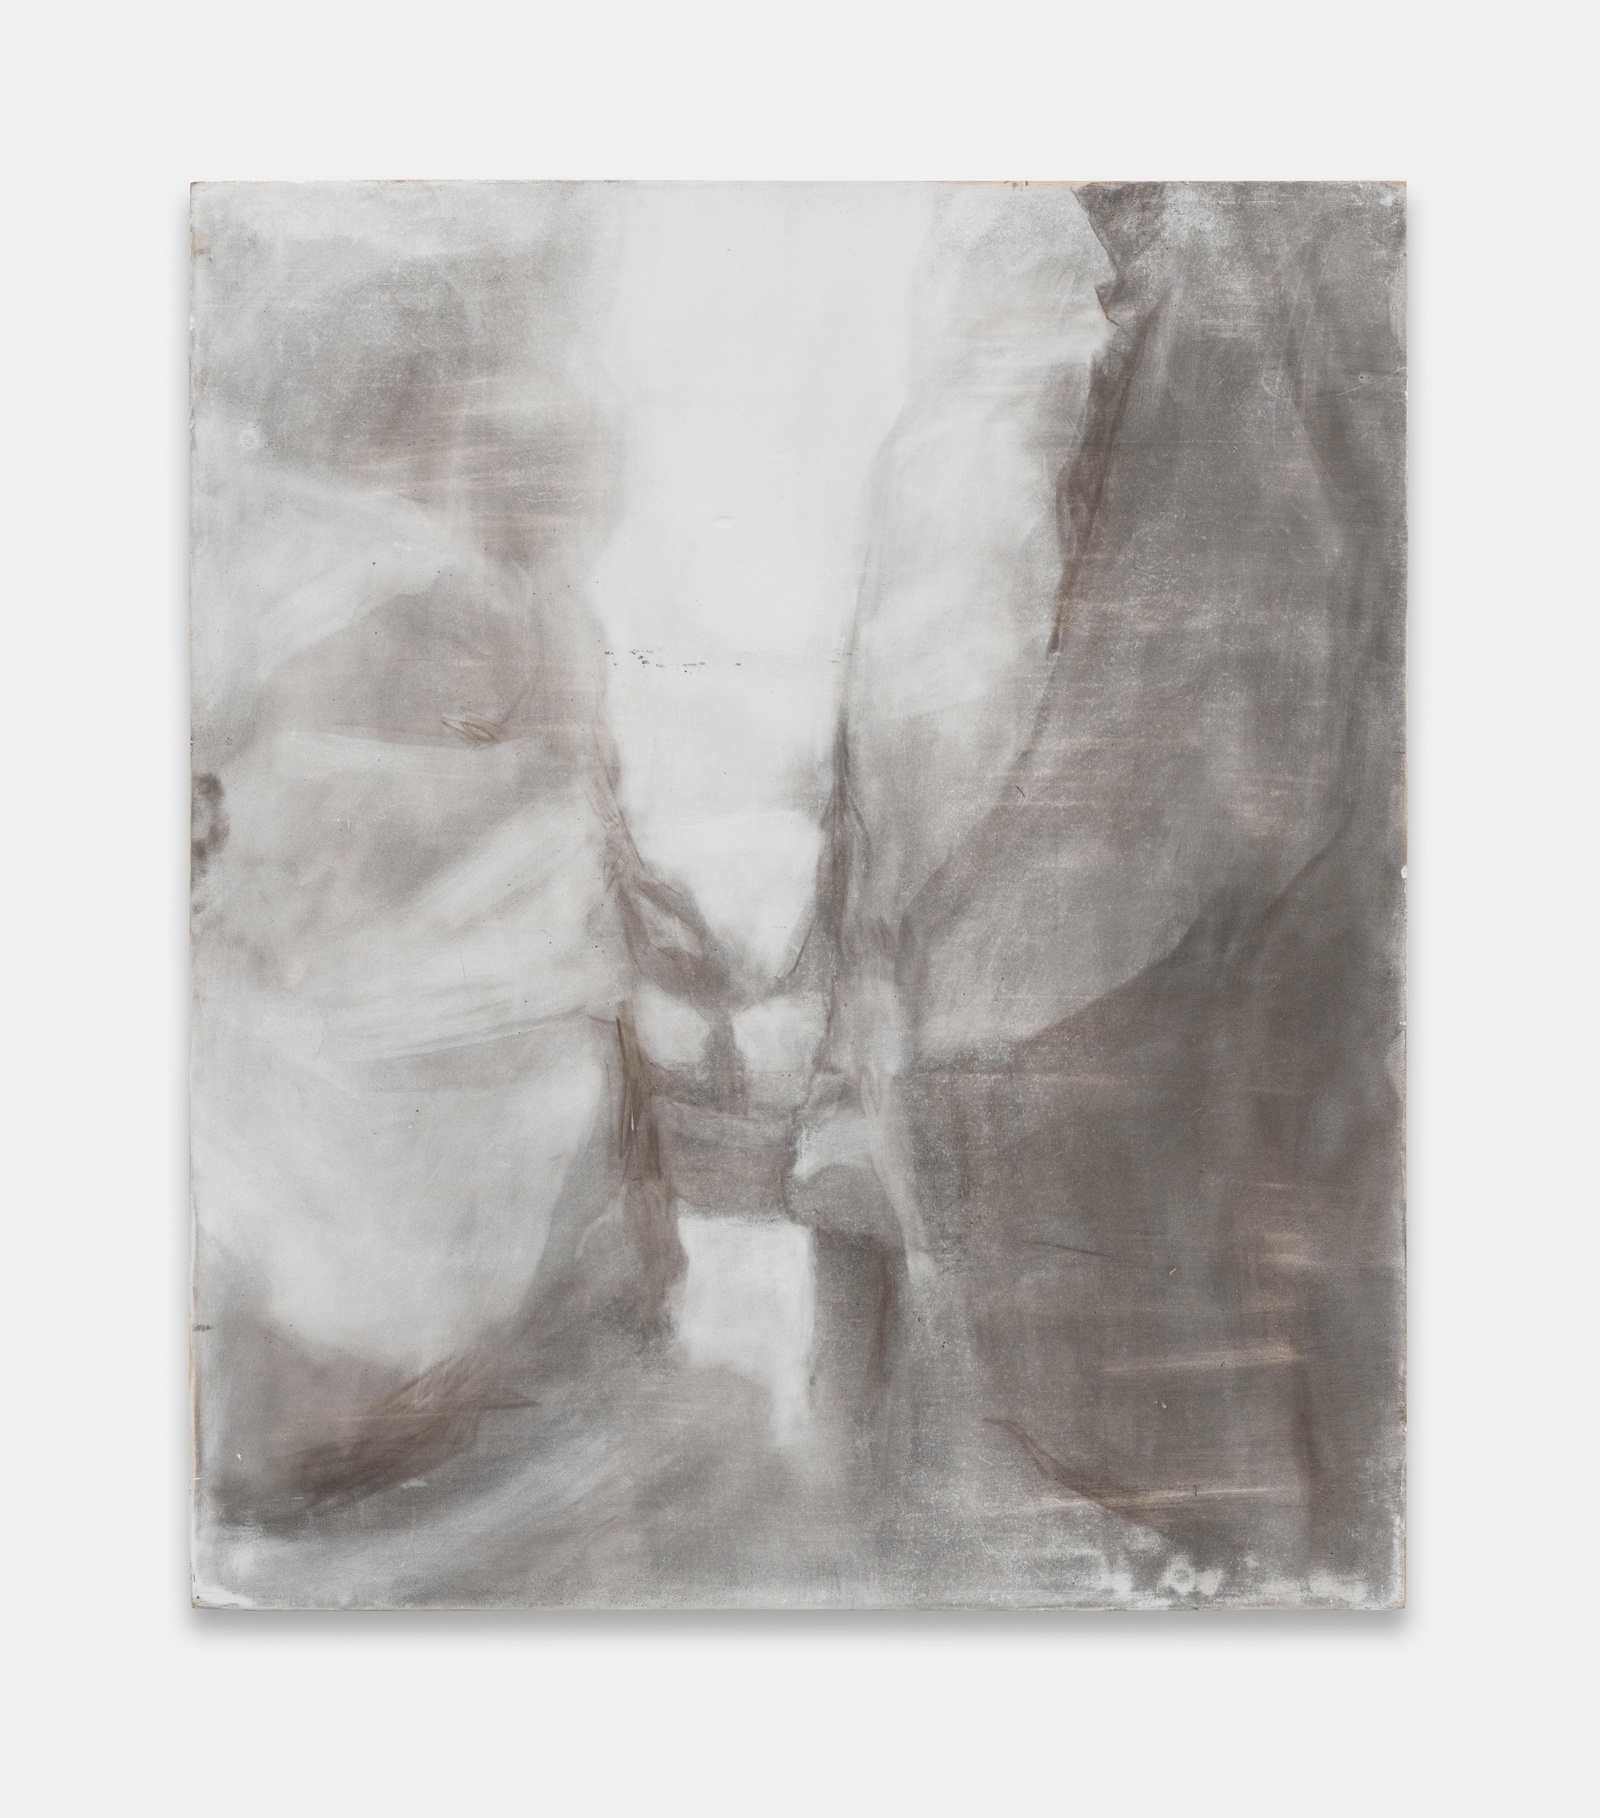 Beaux MendesFelsentor, 2022charcoal on marble dust on panel29.5 x 25 cm | 11 2/3 x 9 3/4 in